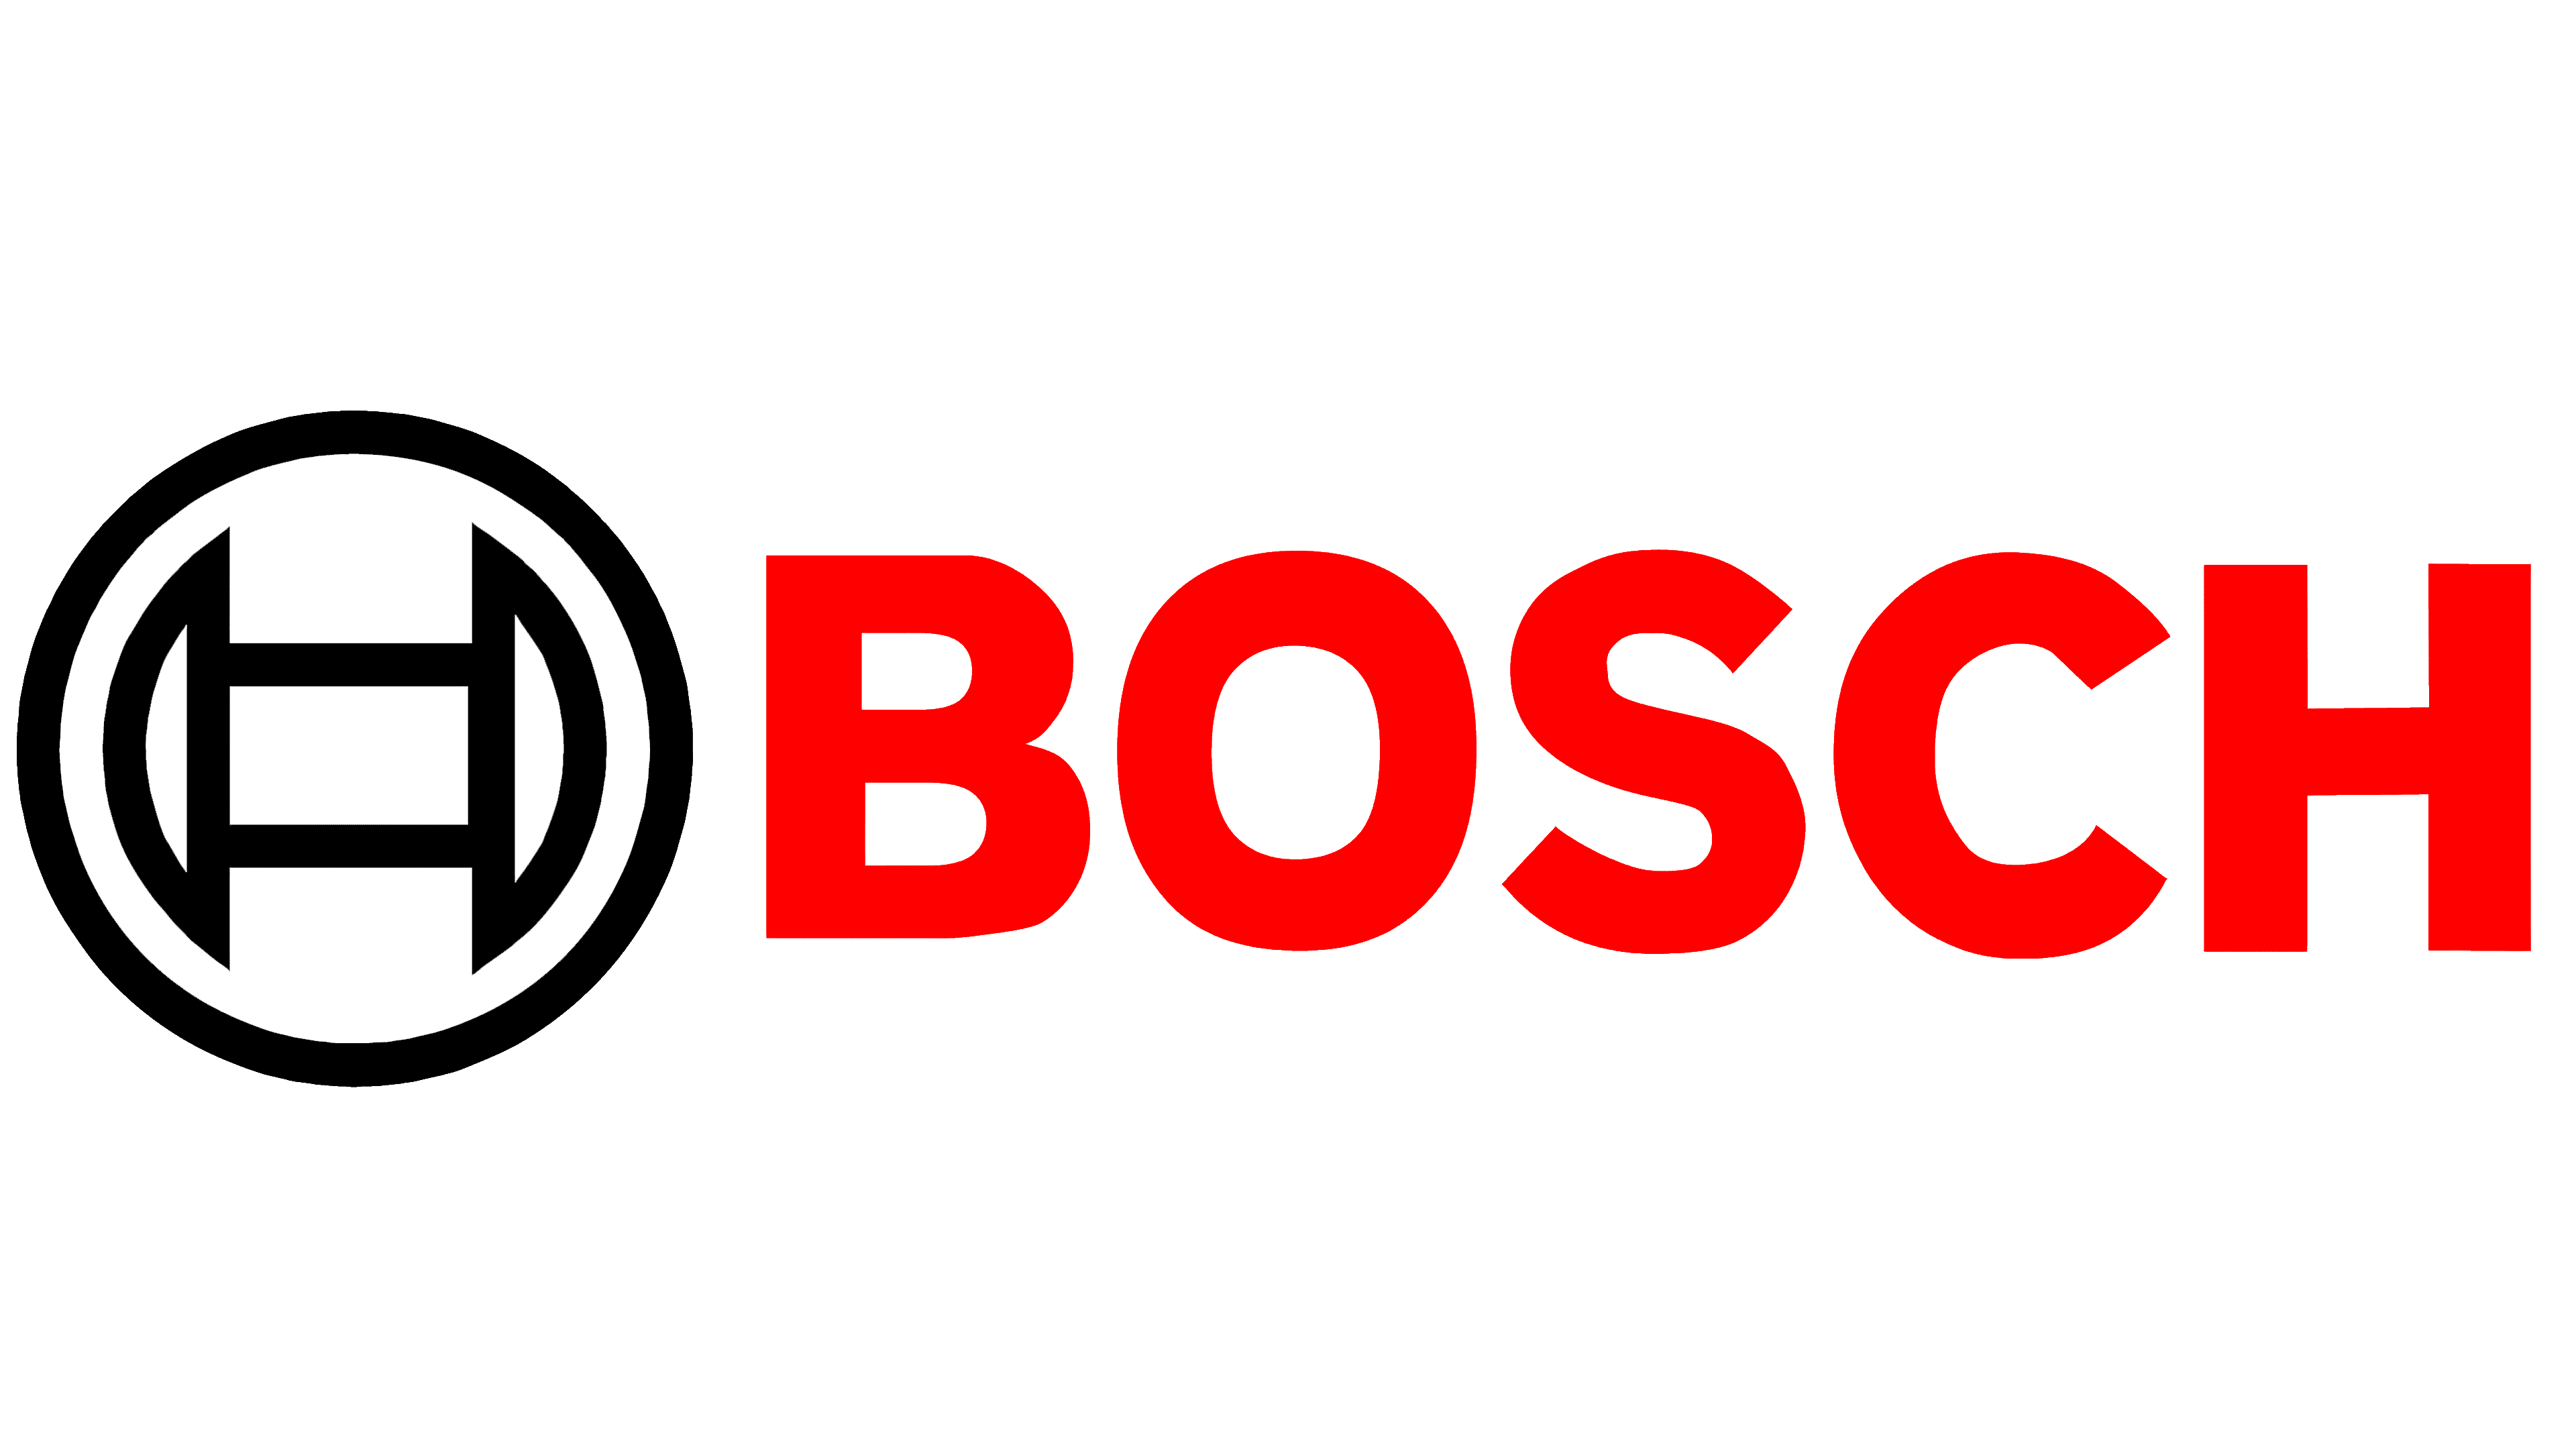 Bosch Logo History | The most famous brands and company logos in the world